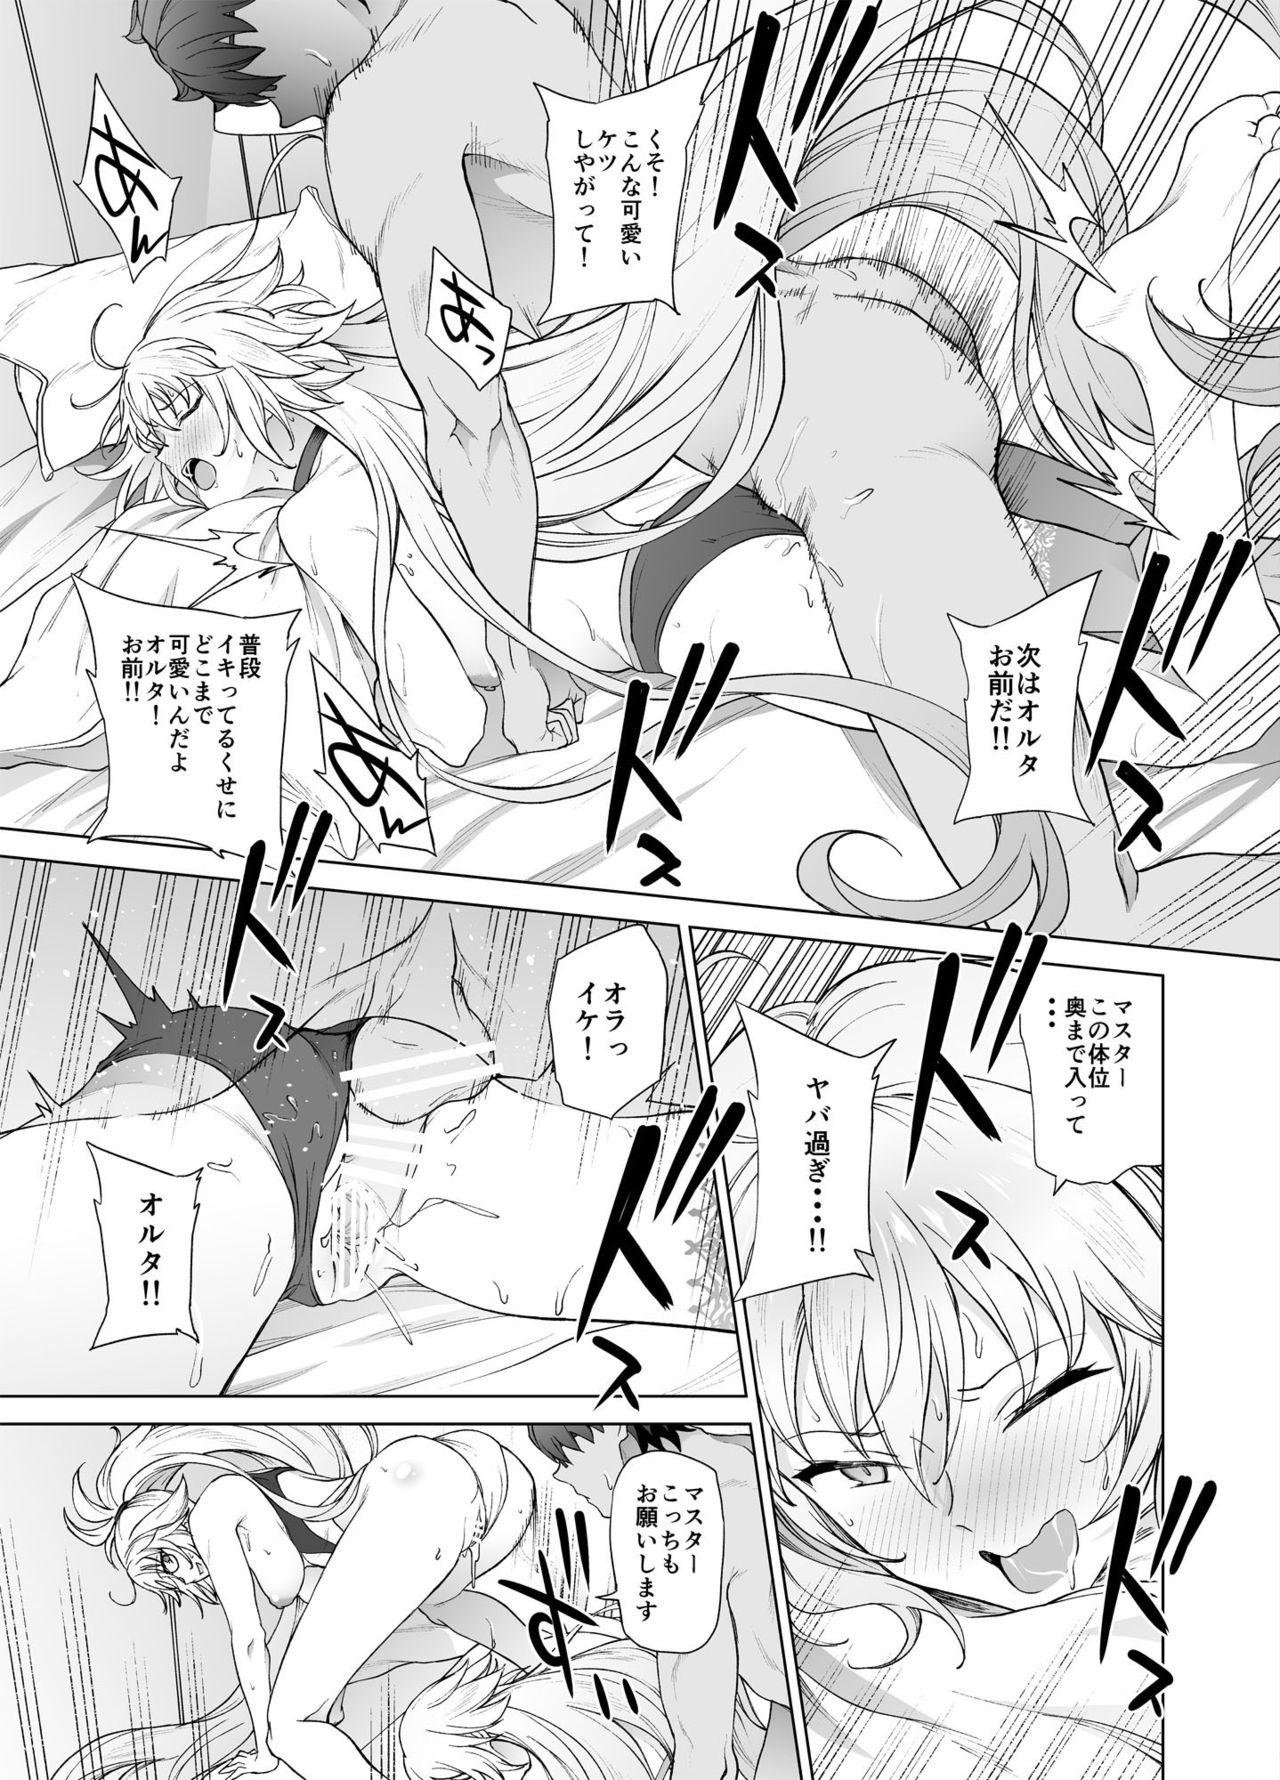 [EXTENDED PART (Endo Yoshiki)] Jeanne W (Fate/Grand Order) [Digital] page 32 full